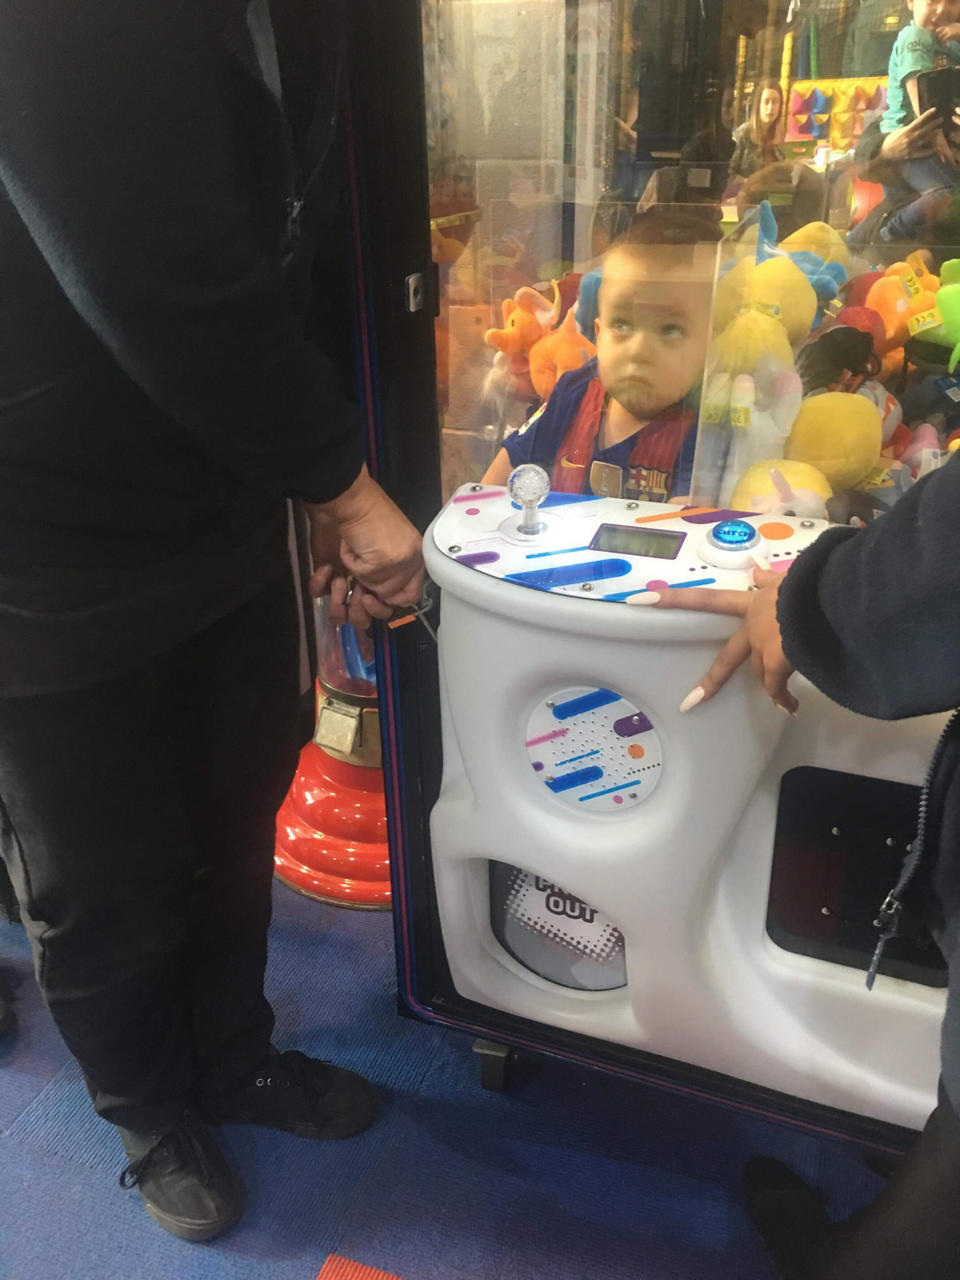 Noah Draper pictured trapped inside a toy machine after climbing in to get himself a teddy.